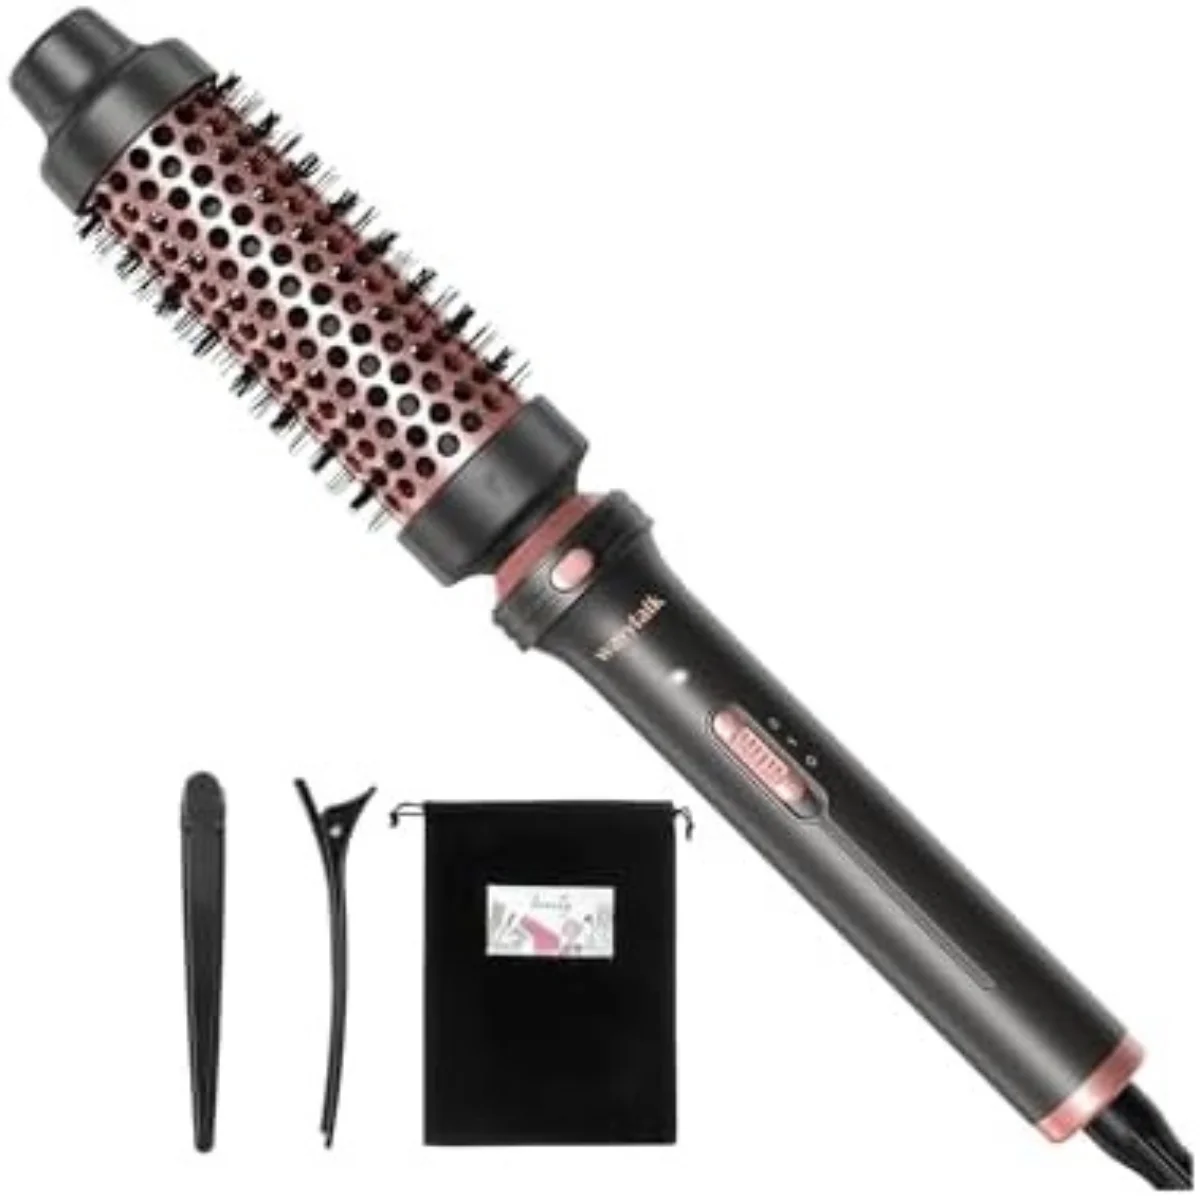 Round Voltage 1/2 Heater, Crest Thermal Brush for Travel Retail Tourmaline and Detachable Curling Brush, Ceramic Head inch – with Wavytalk Heated Brush 1 with Round Iron Brush, Dual Hot PTC